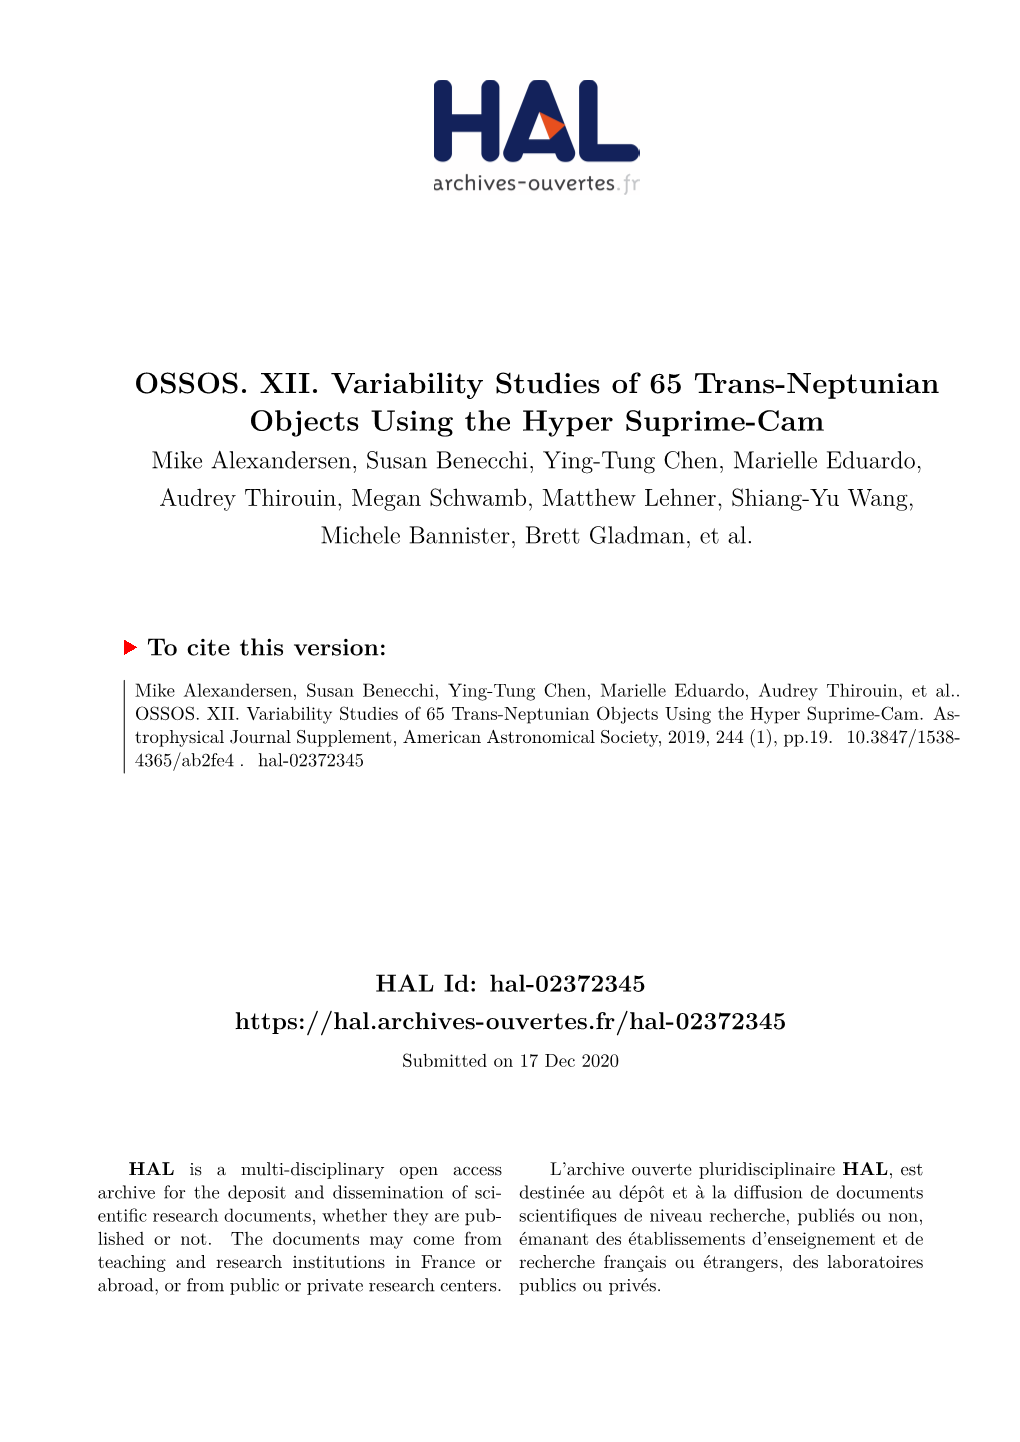 OSSOS. XII. Variability Studies of 65 Trans-Neptunian Objects Using The